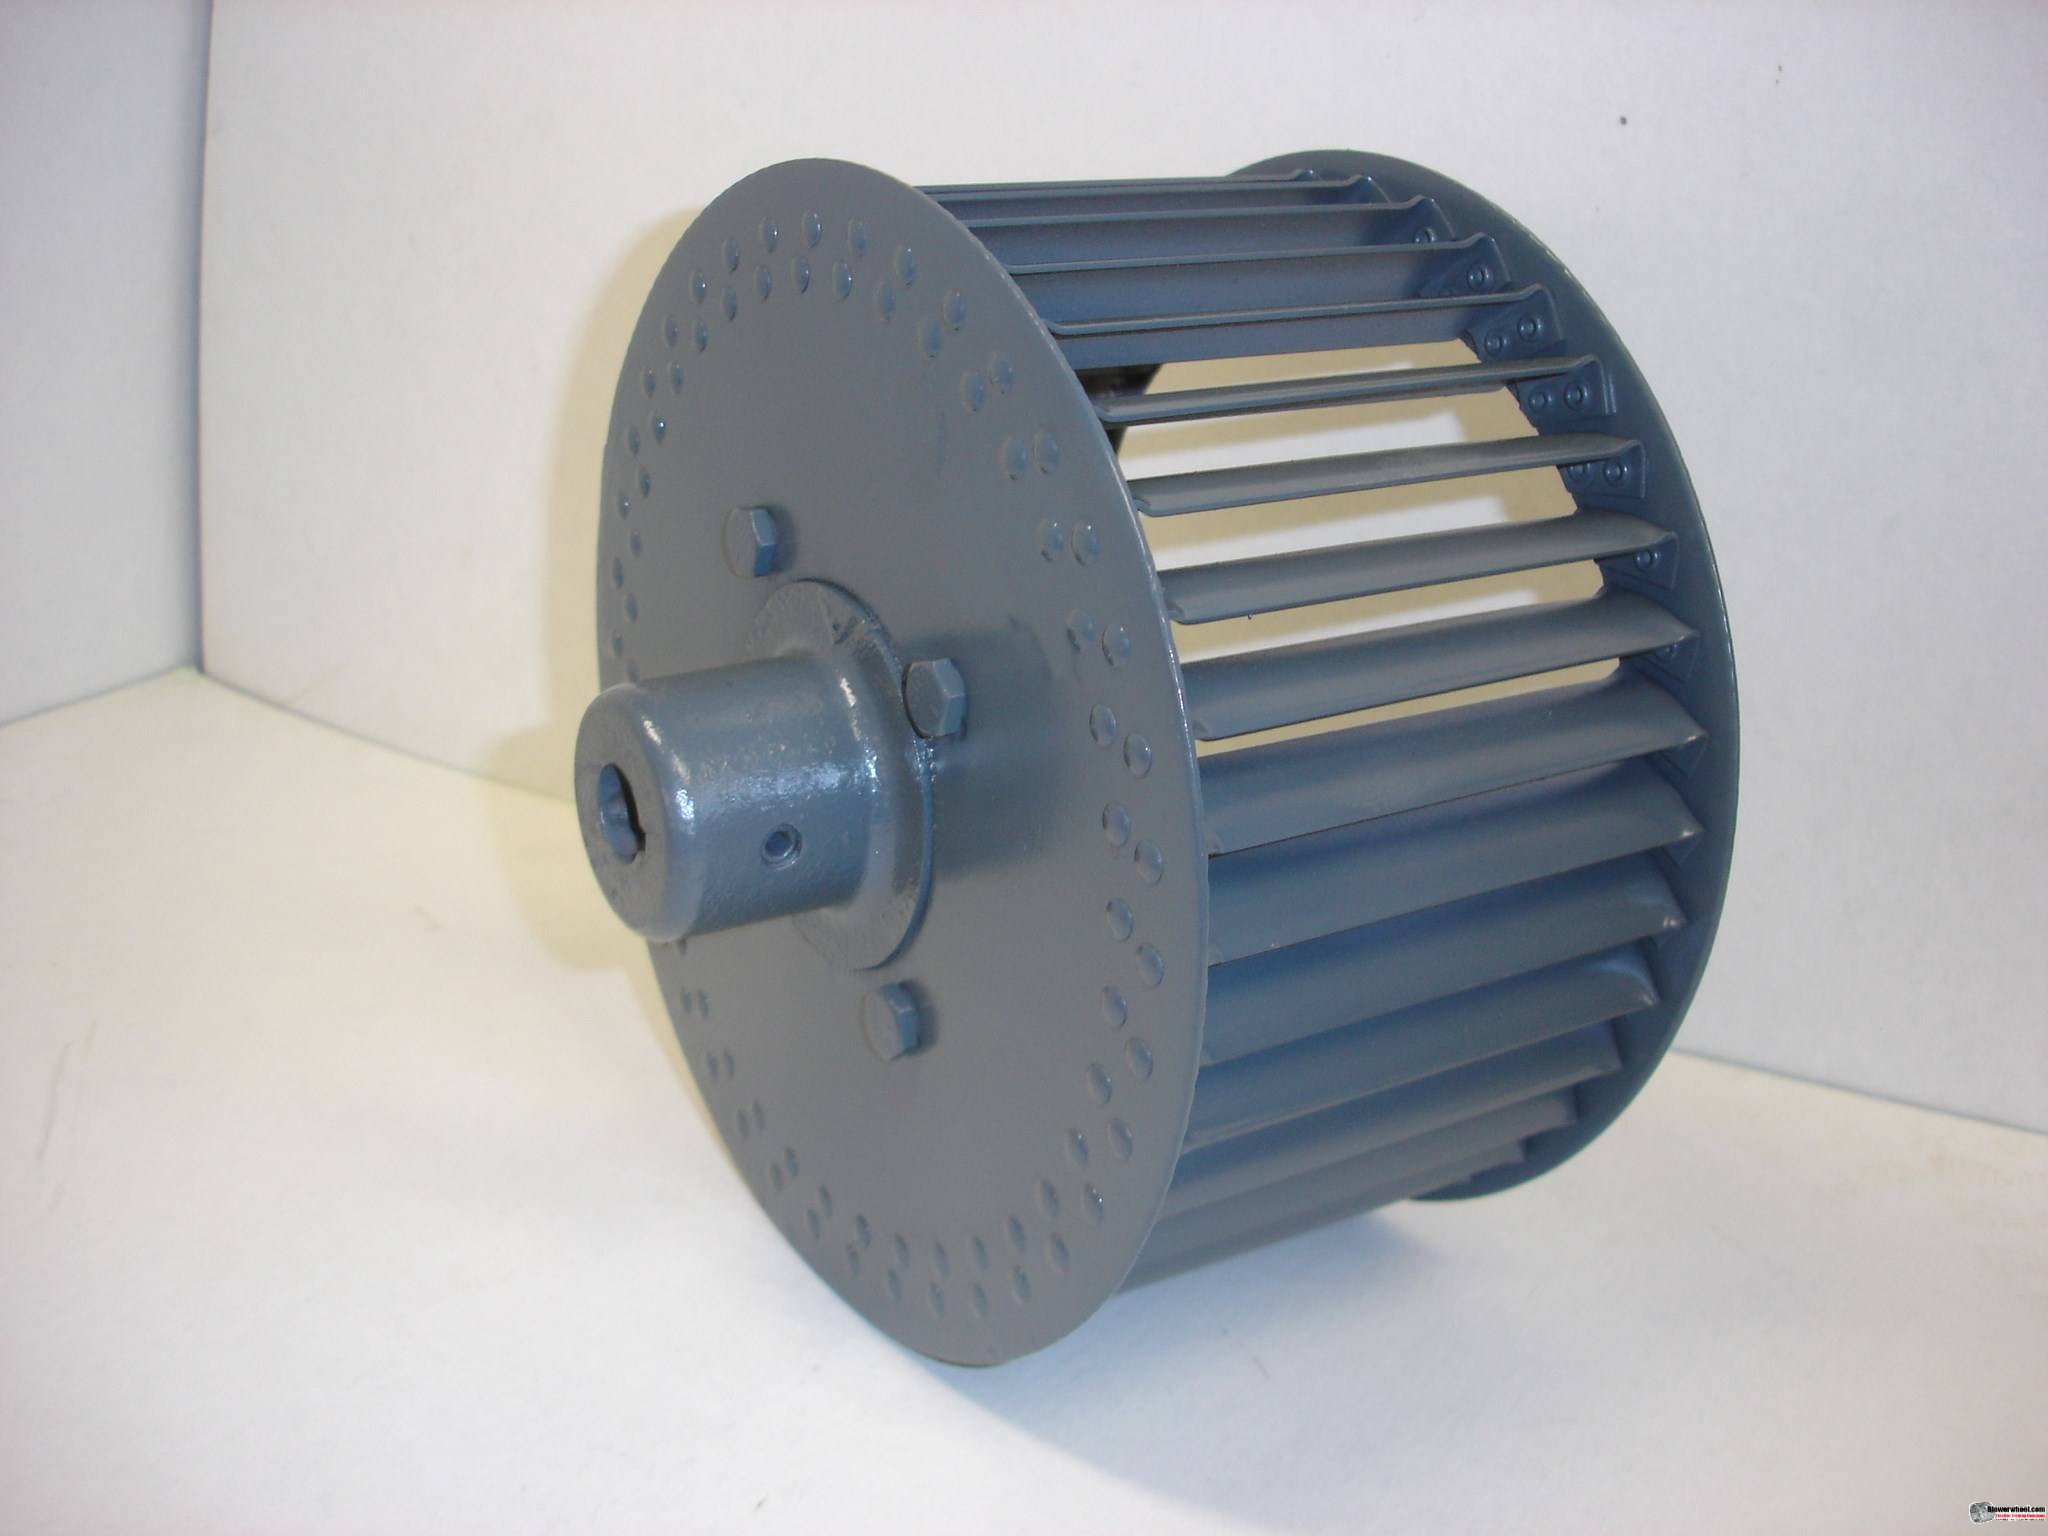 Single Inlet Aluminum Blower Wheel 9" Diameter 3-1/8" Width 5/8" Bore Clockwise rotation with an Outside Hub